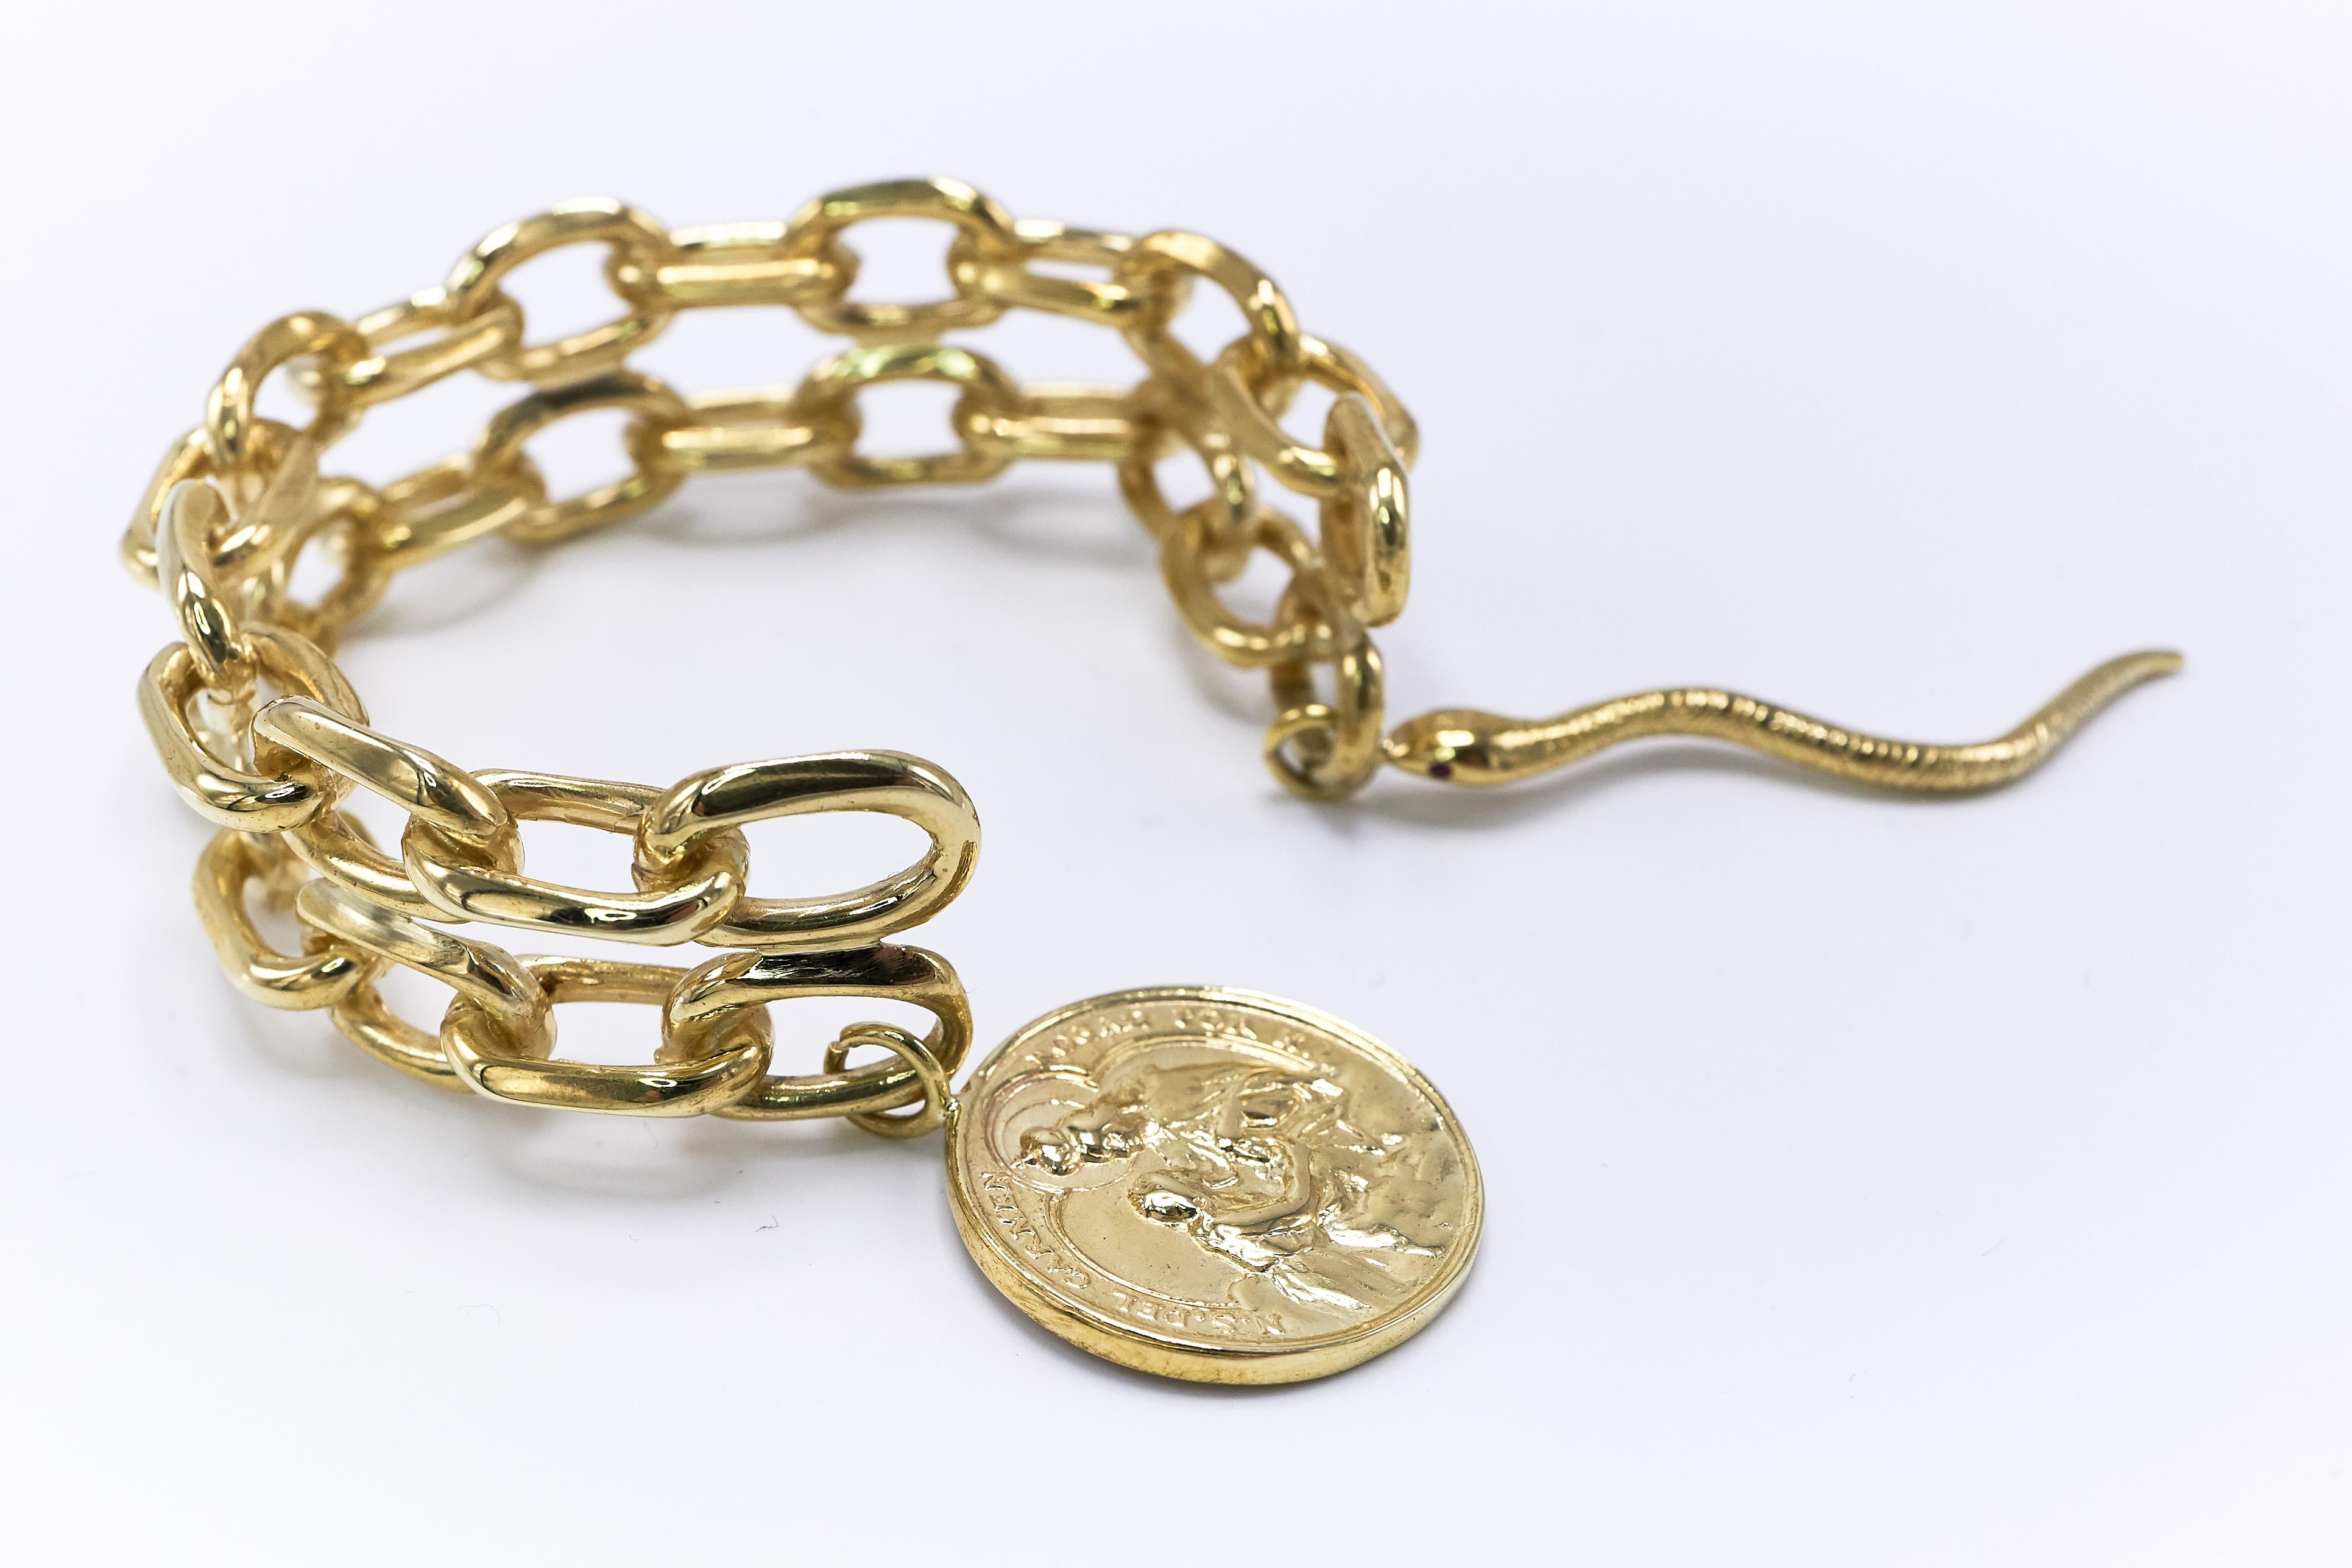 Statement Chunky Chain Cuff Bangle Bracelet Medal Gold Vermeil J Dauphin In New Condition For Sale In Los Angeles, CA